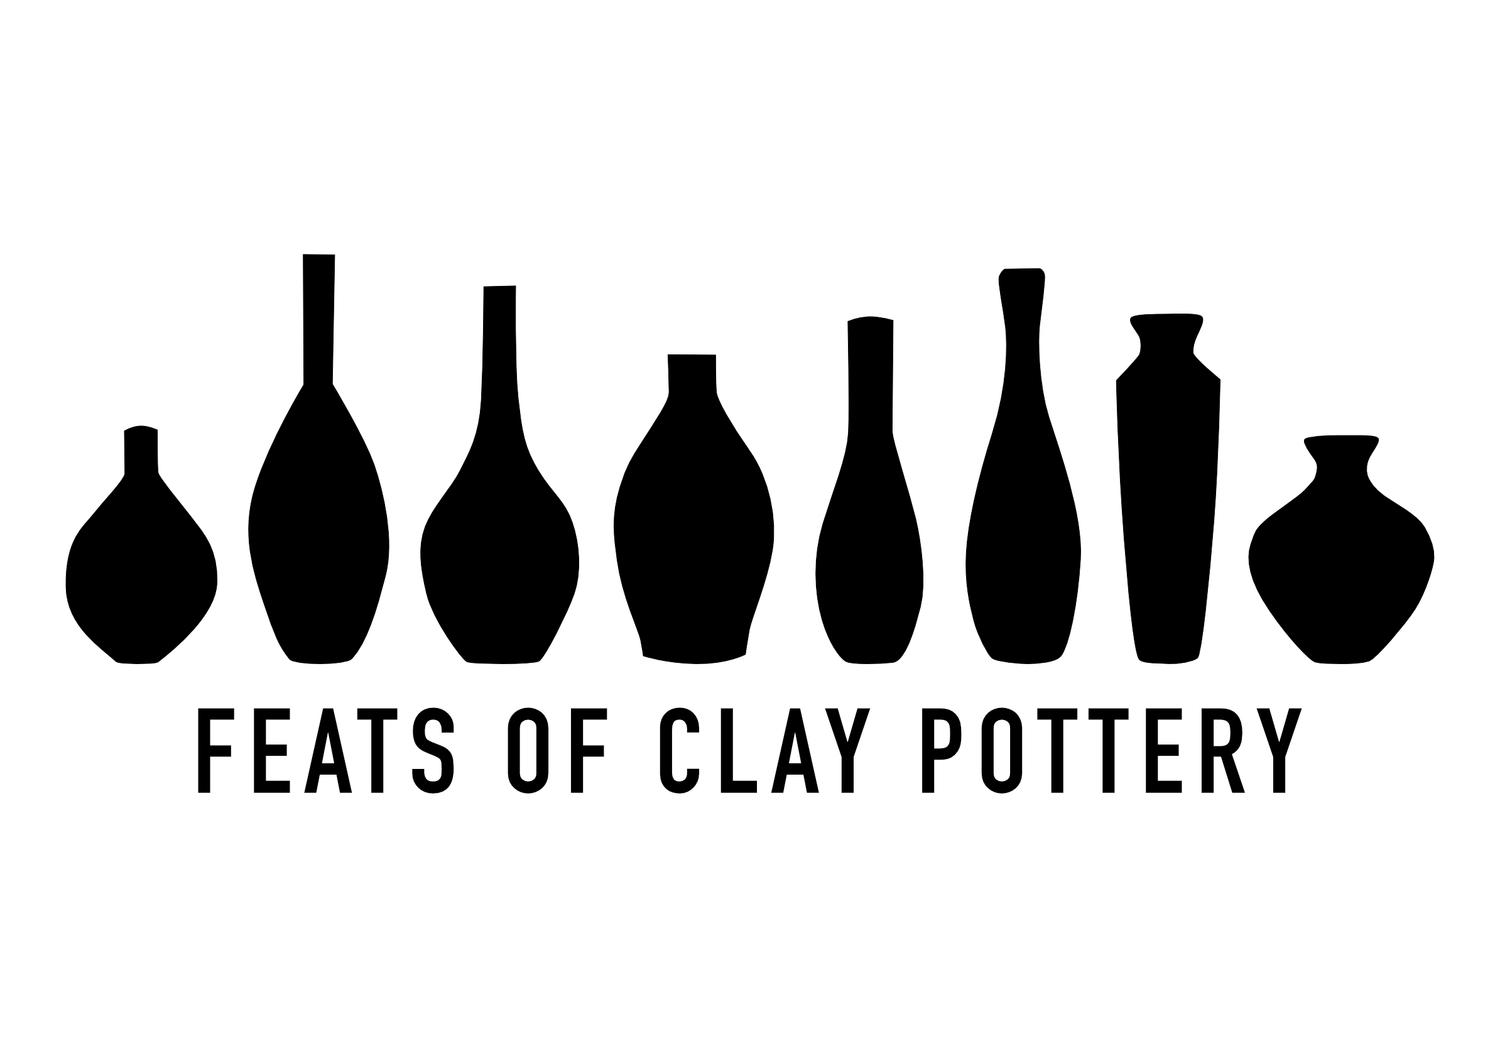 Feats of Clay